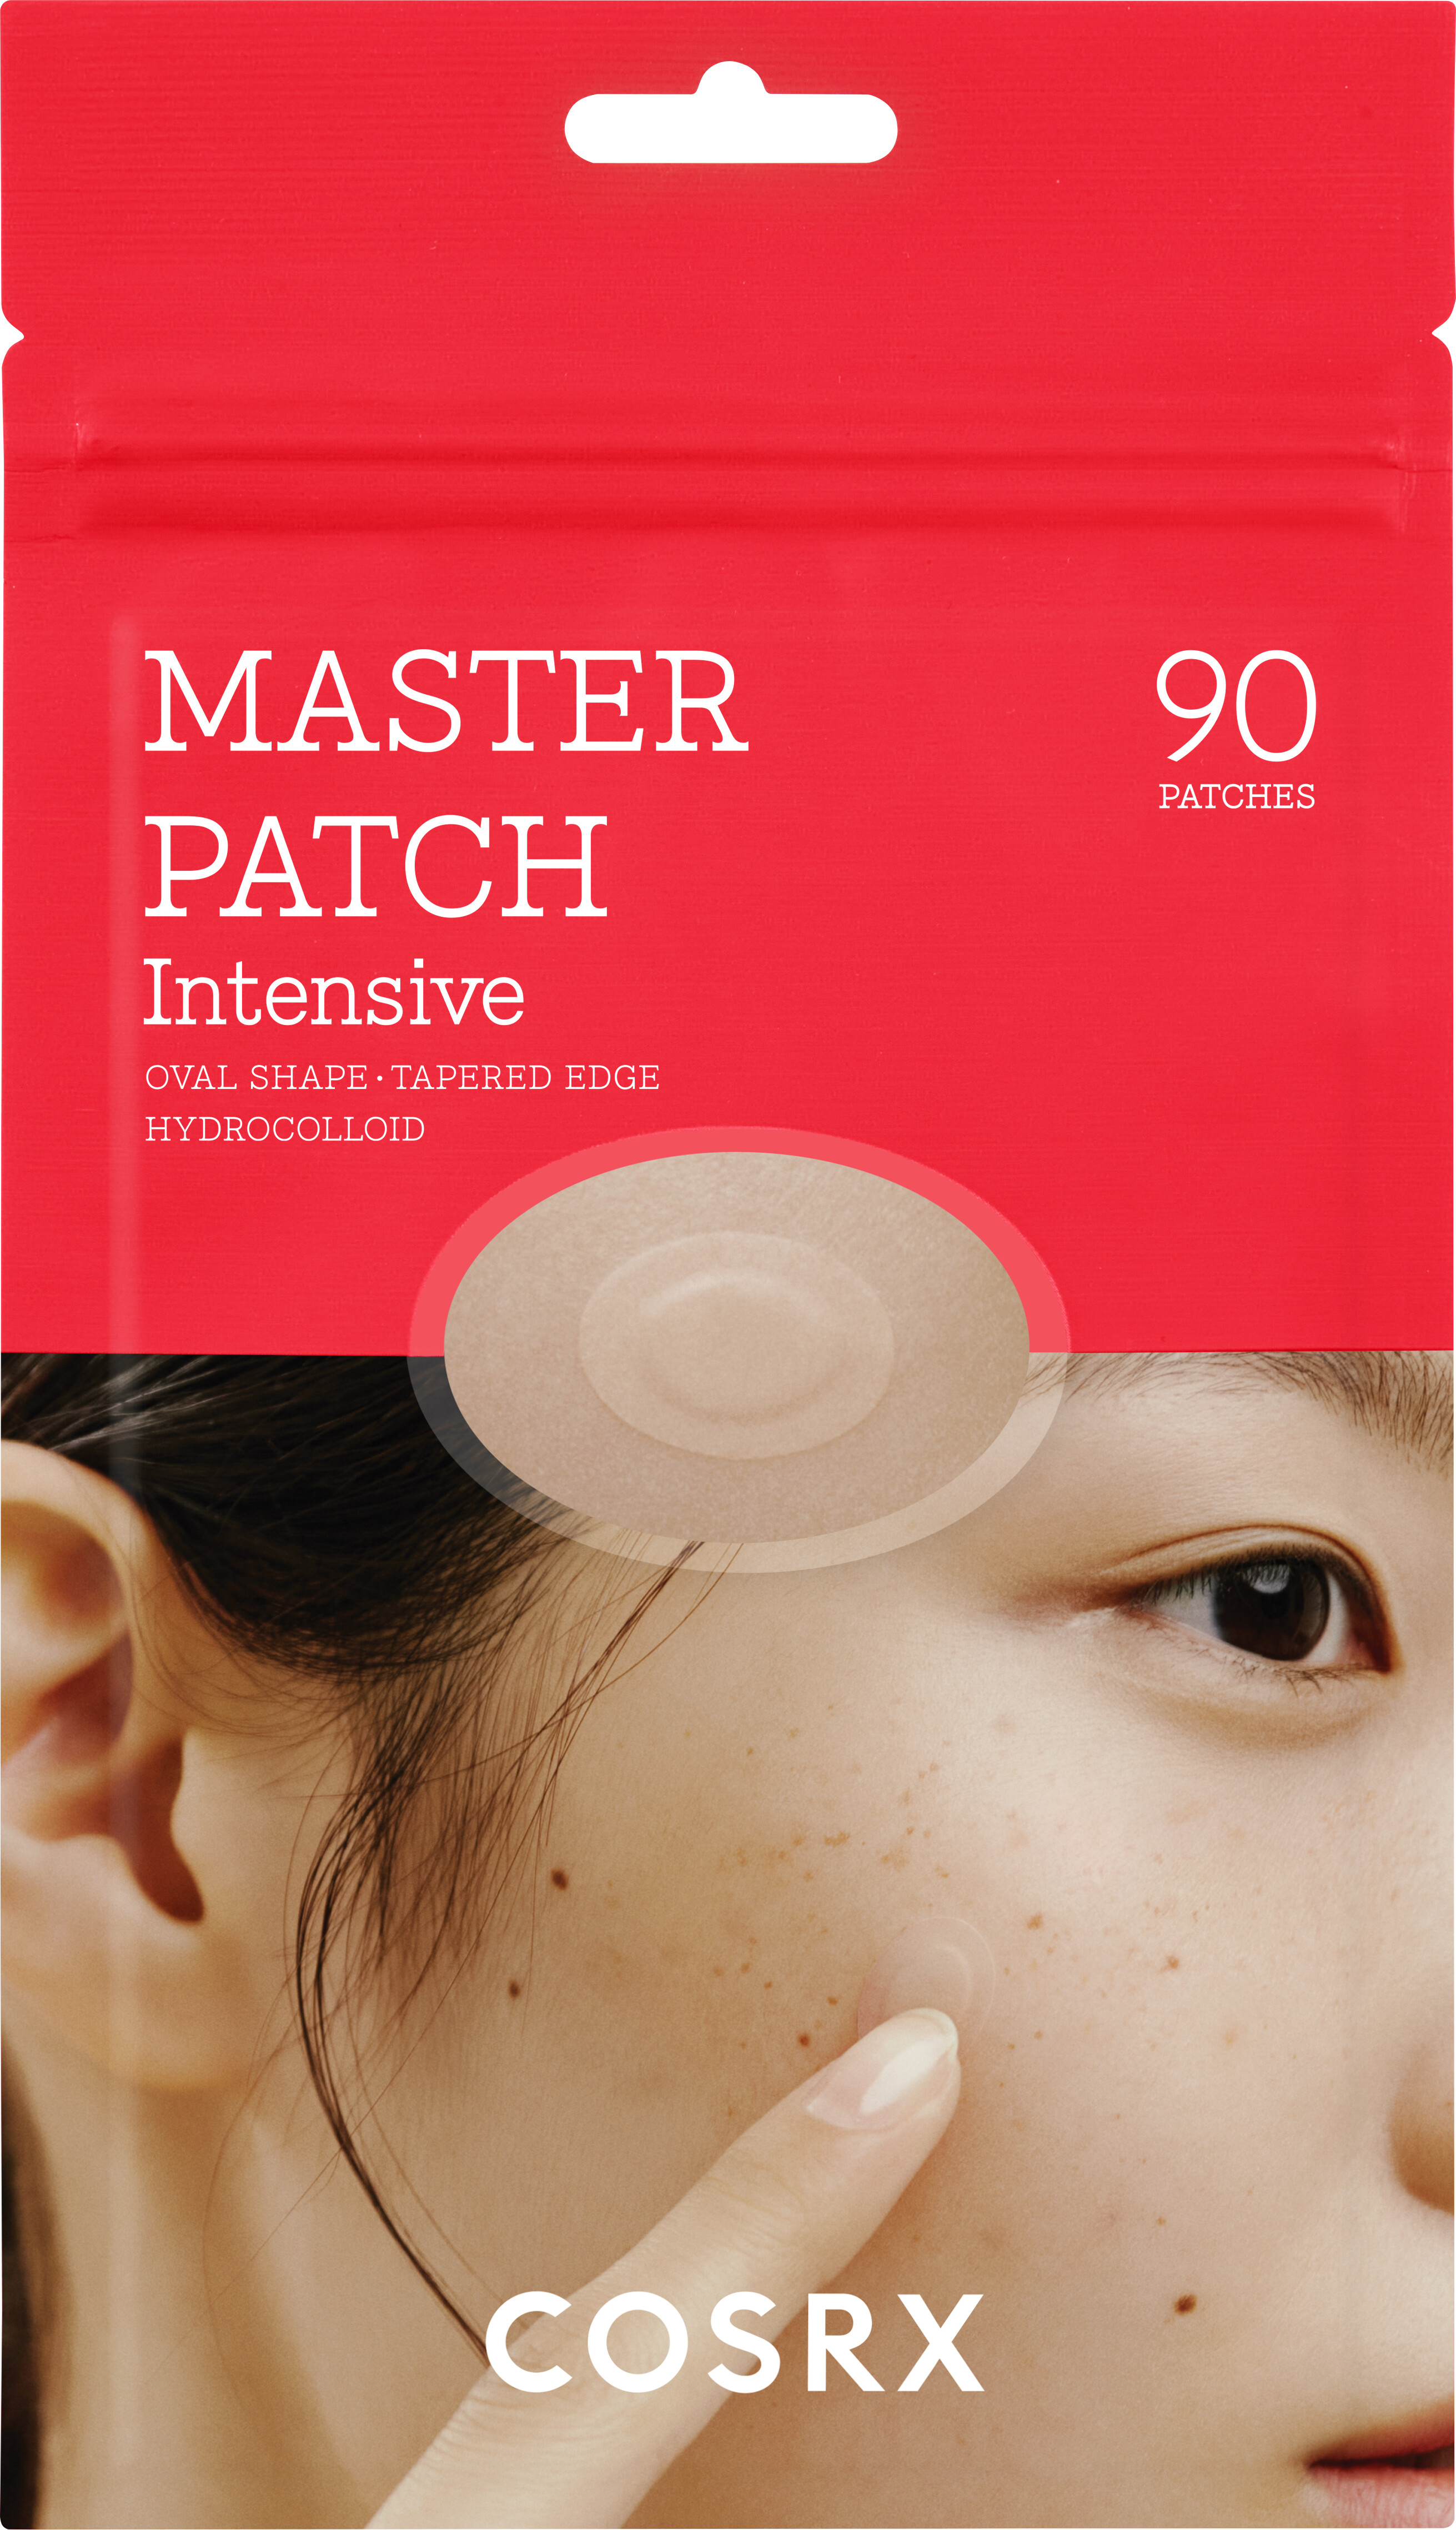 COSRX Master Patch Intensive Patches 90